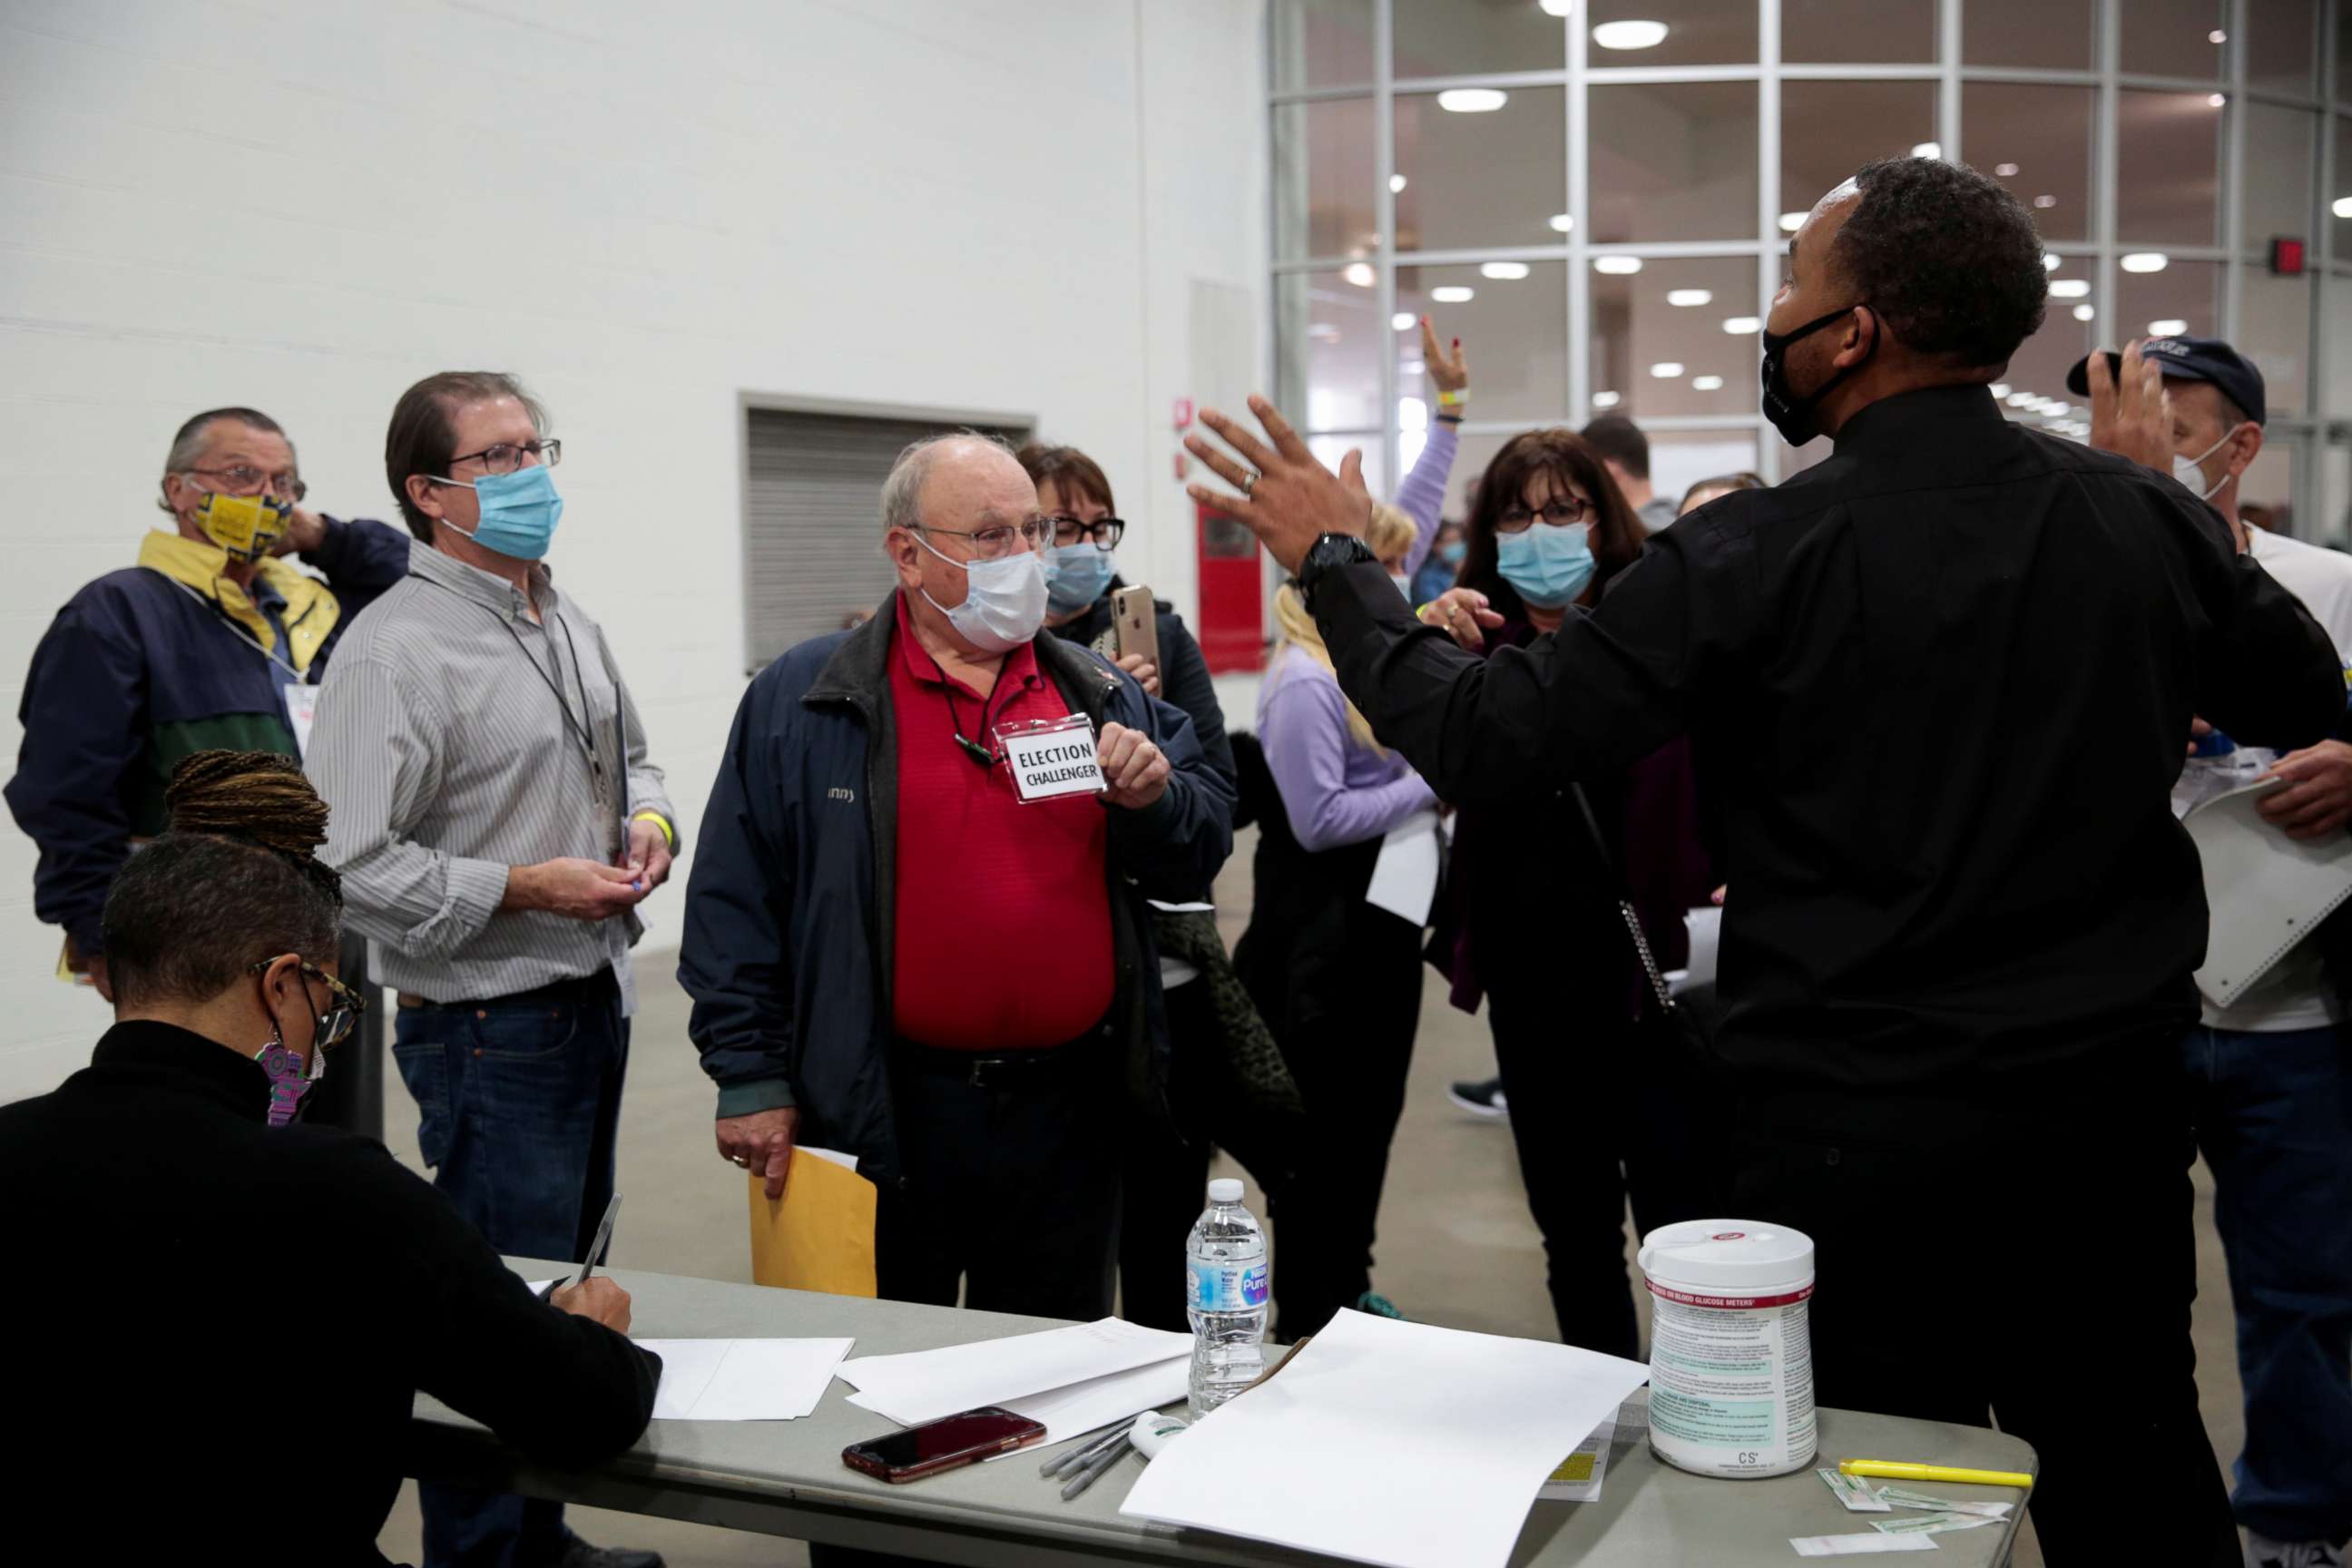 PHOTO: A poll challenger argues with police and officials after being asked to leave due to room capacity at the TCF Center after election day in Detroit, Nov. 4, 2020.